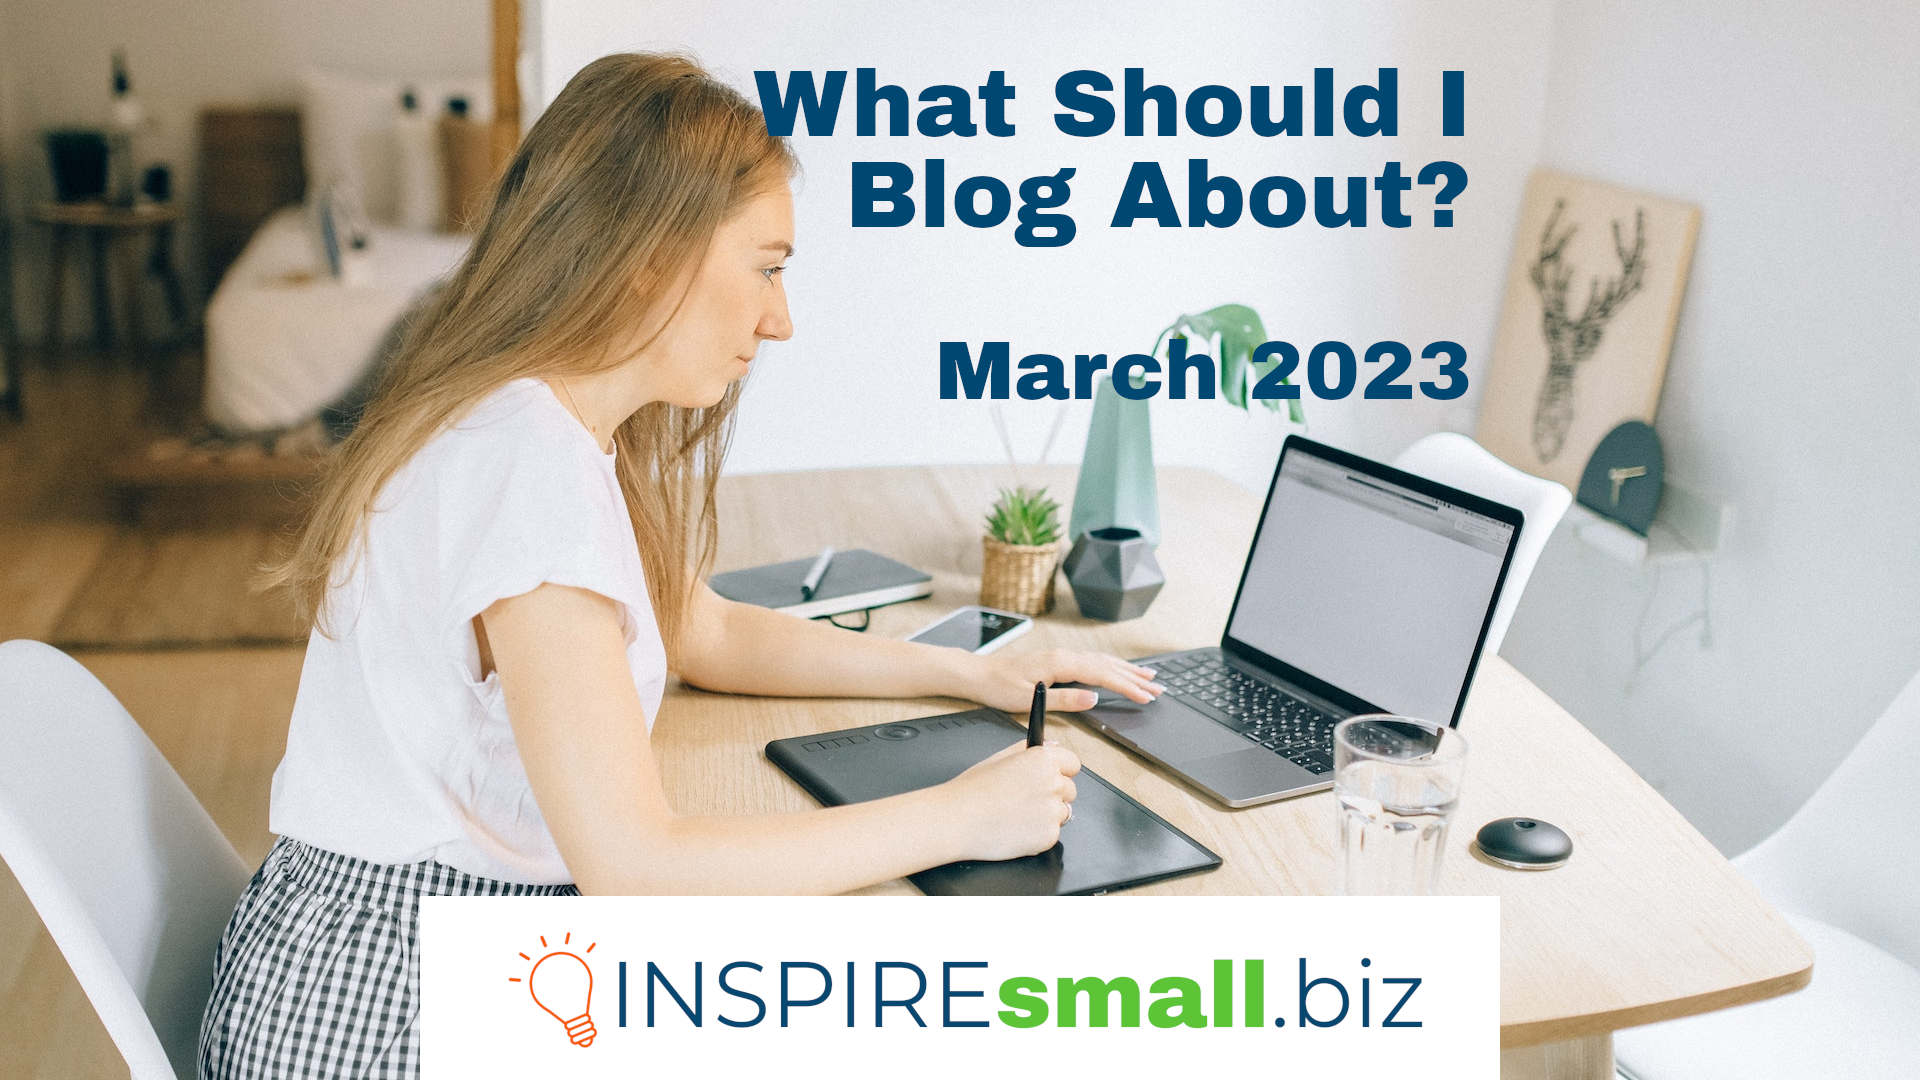 What Should I Blog About? March 2023, from INSPIREsmall.biz